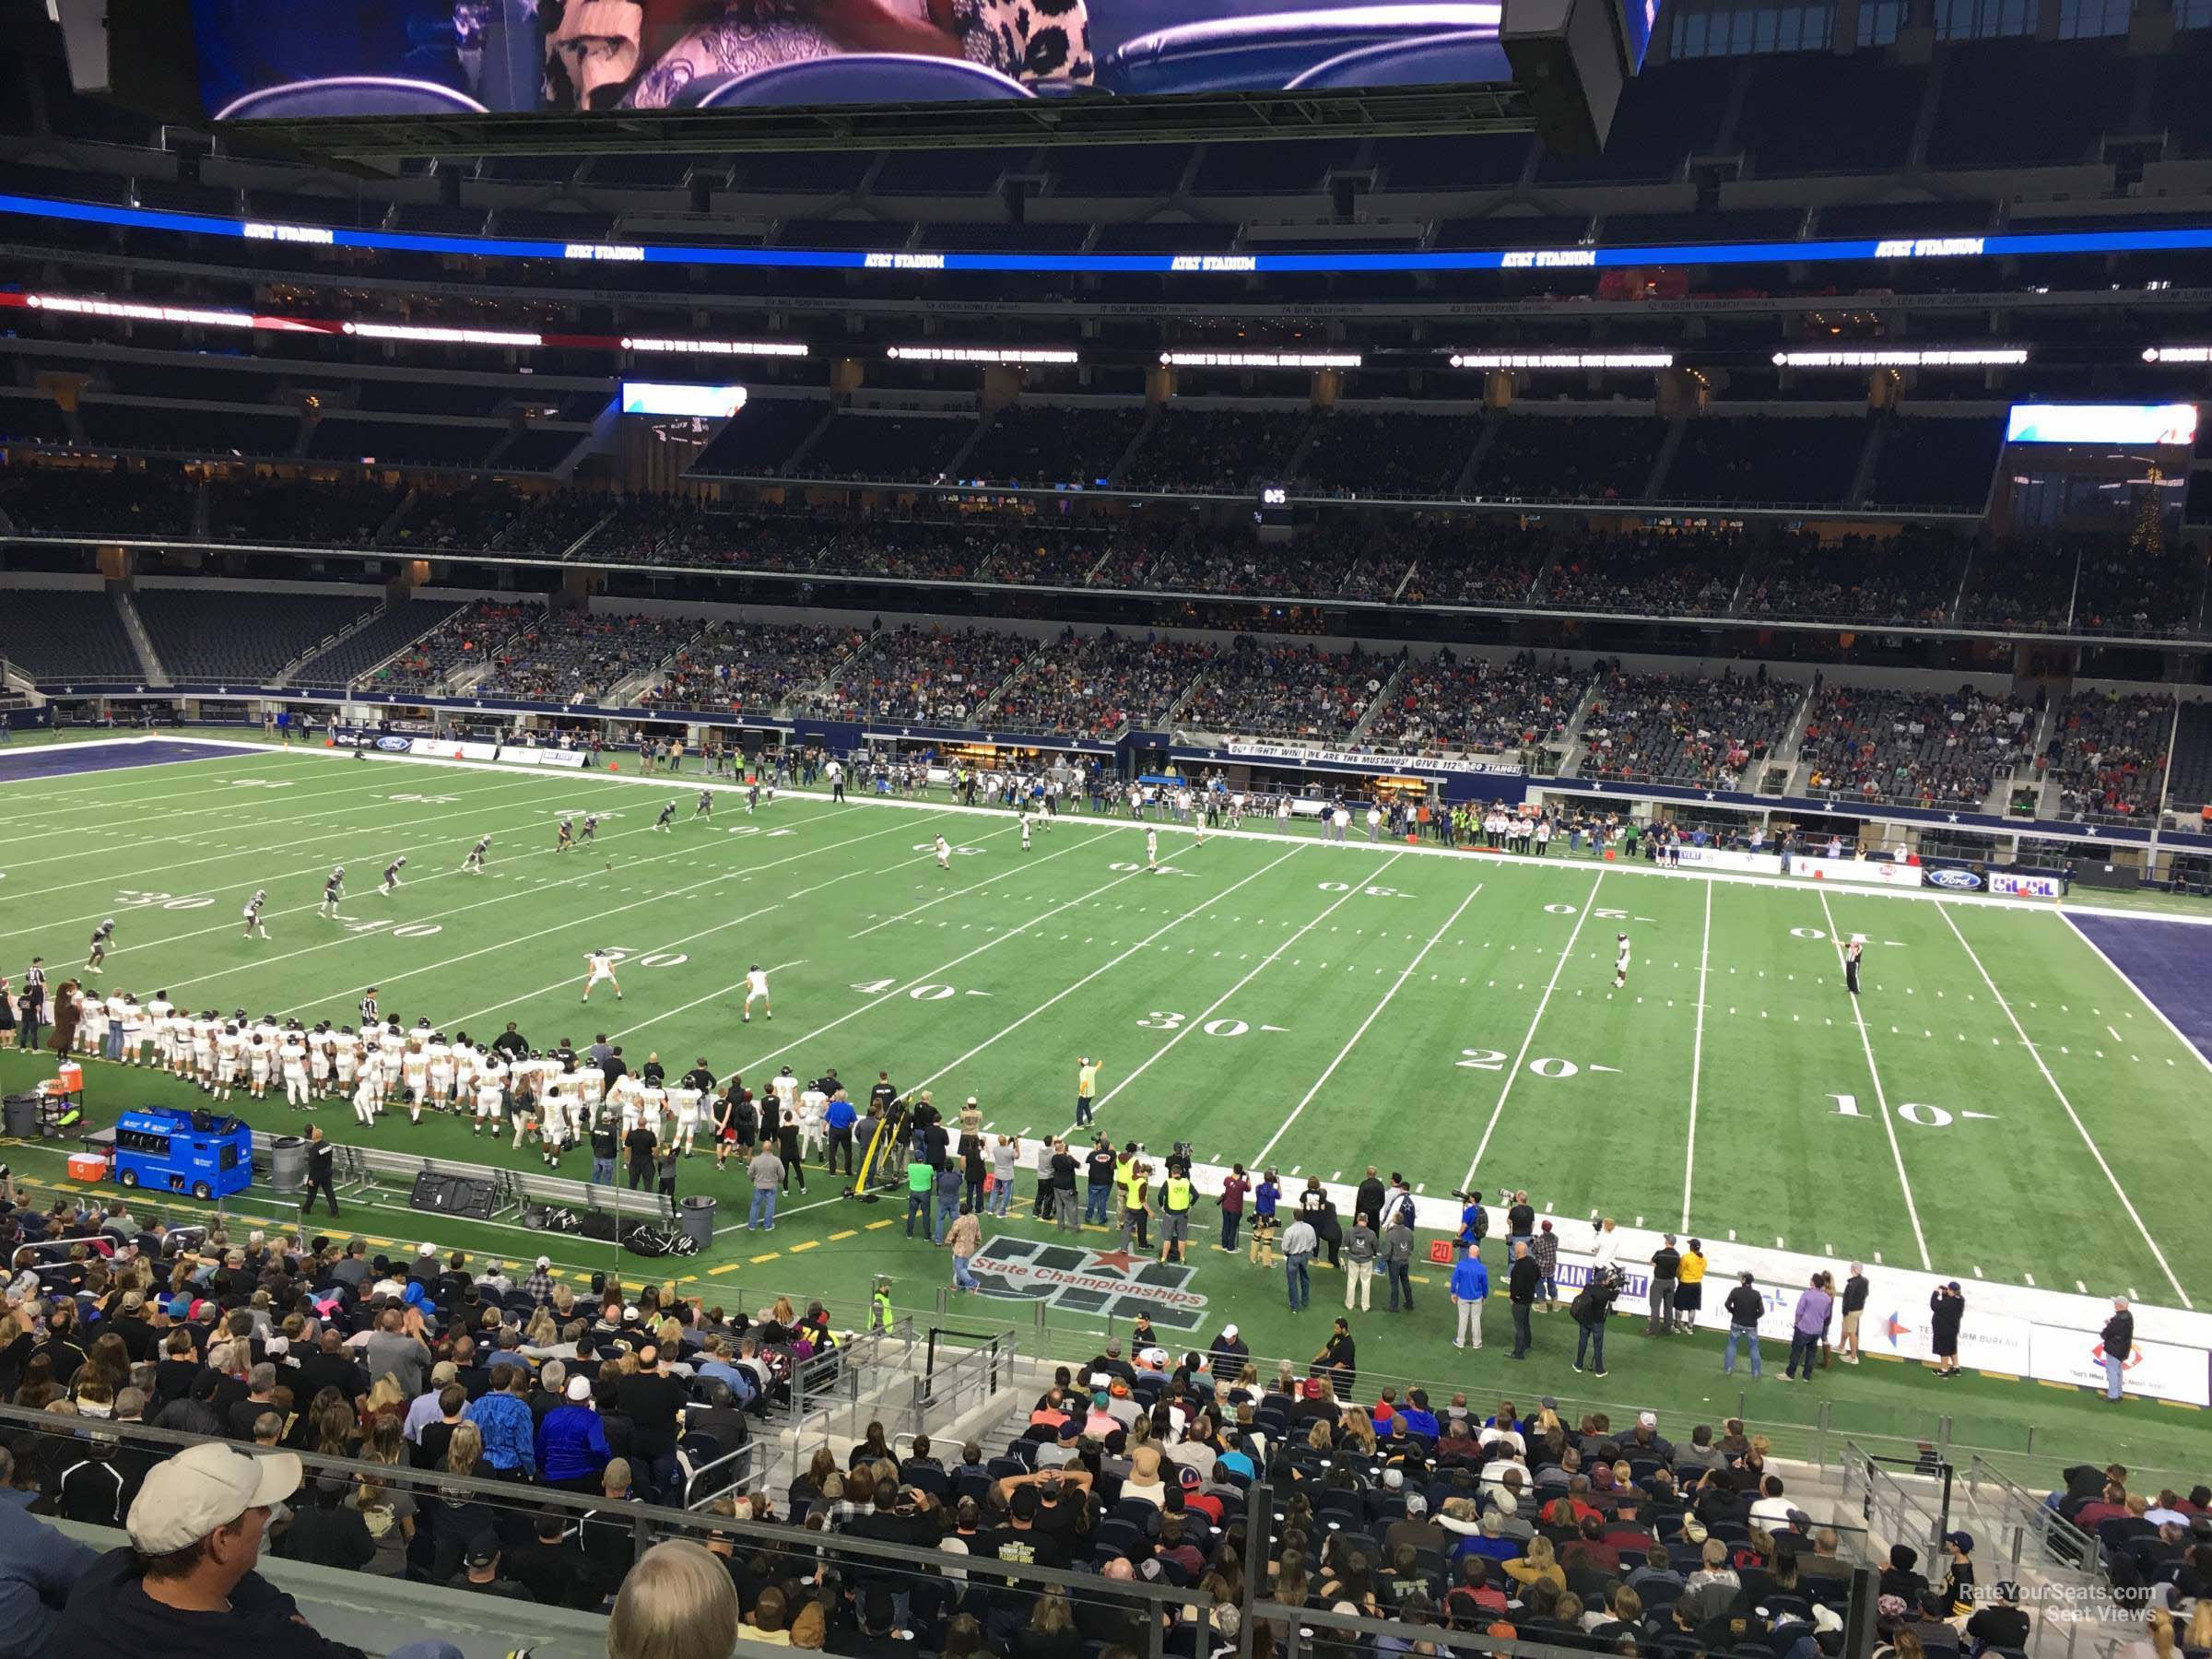 section c232, row 4 seat view  for football - at&t stadium (cowboys stadium)